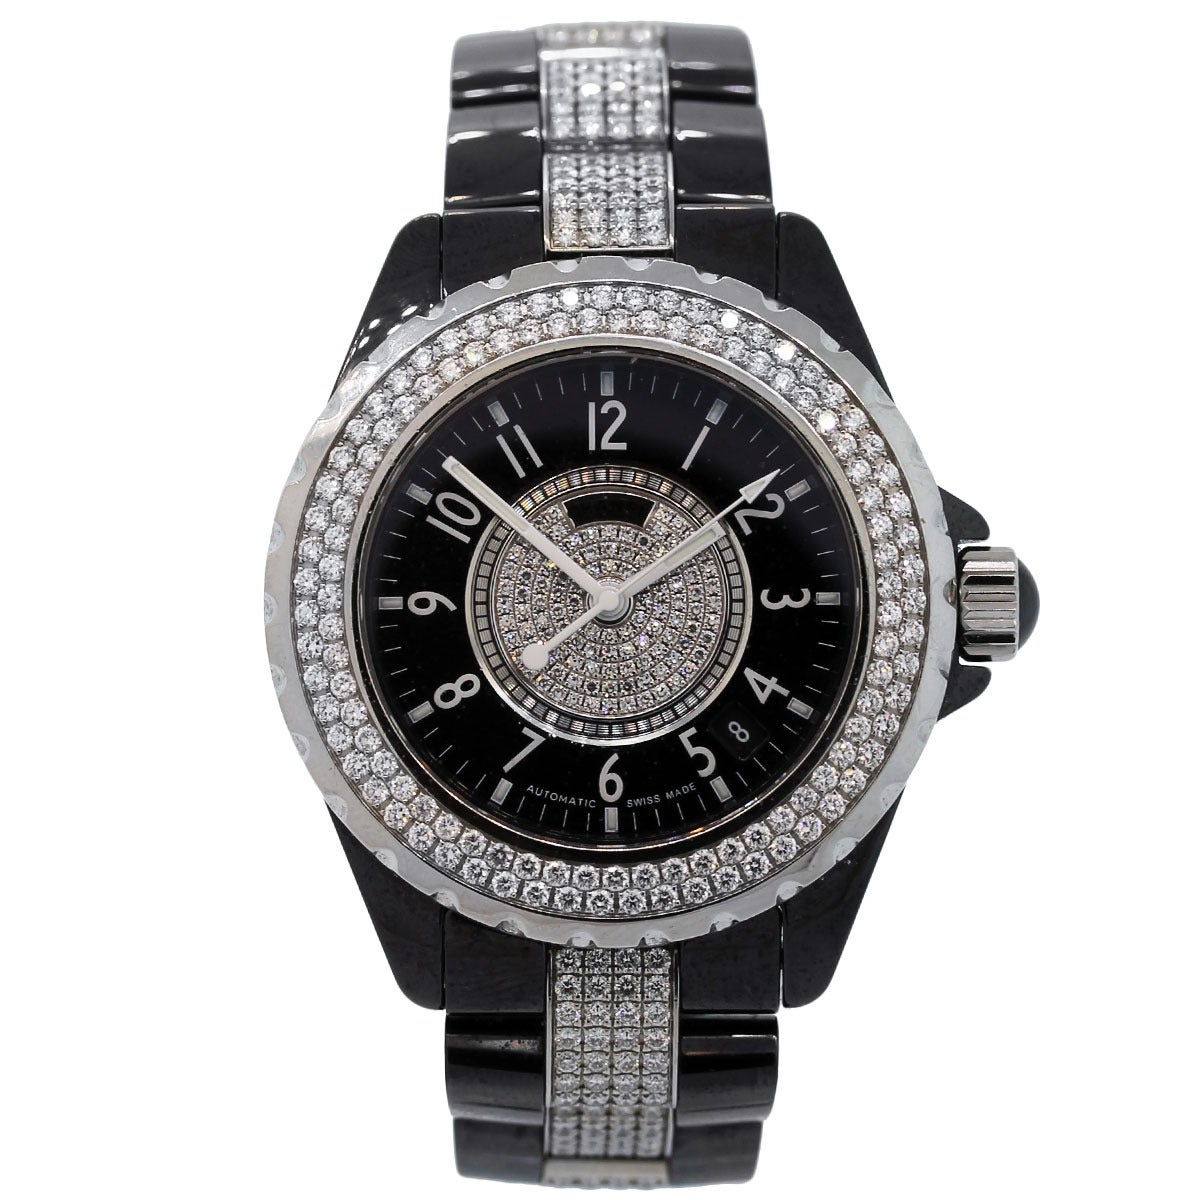 Brand: Chanel
Model: J12
Reference Number: lx 71955
Case Material; Black Ceramic
Dial: Diamond dial with white hands
Bezel: Unidirectional rotating Diamond Bezel
Case Measurements: 38mm
Bracelet: Black Ceramic with diamonds
Clasp: Steel